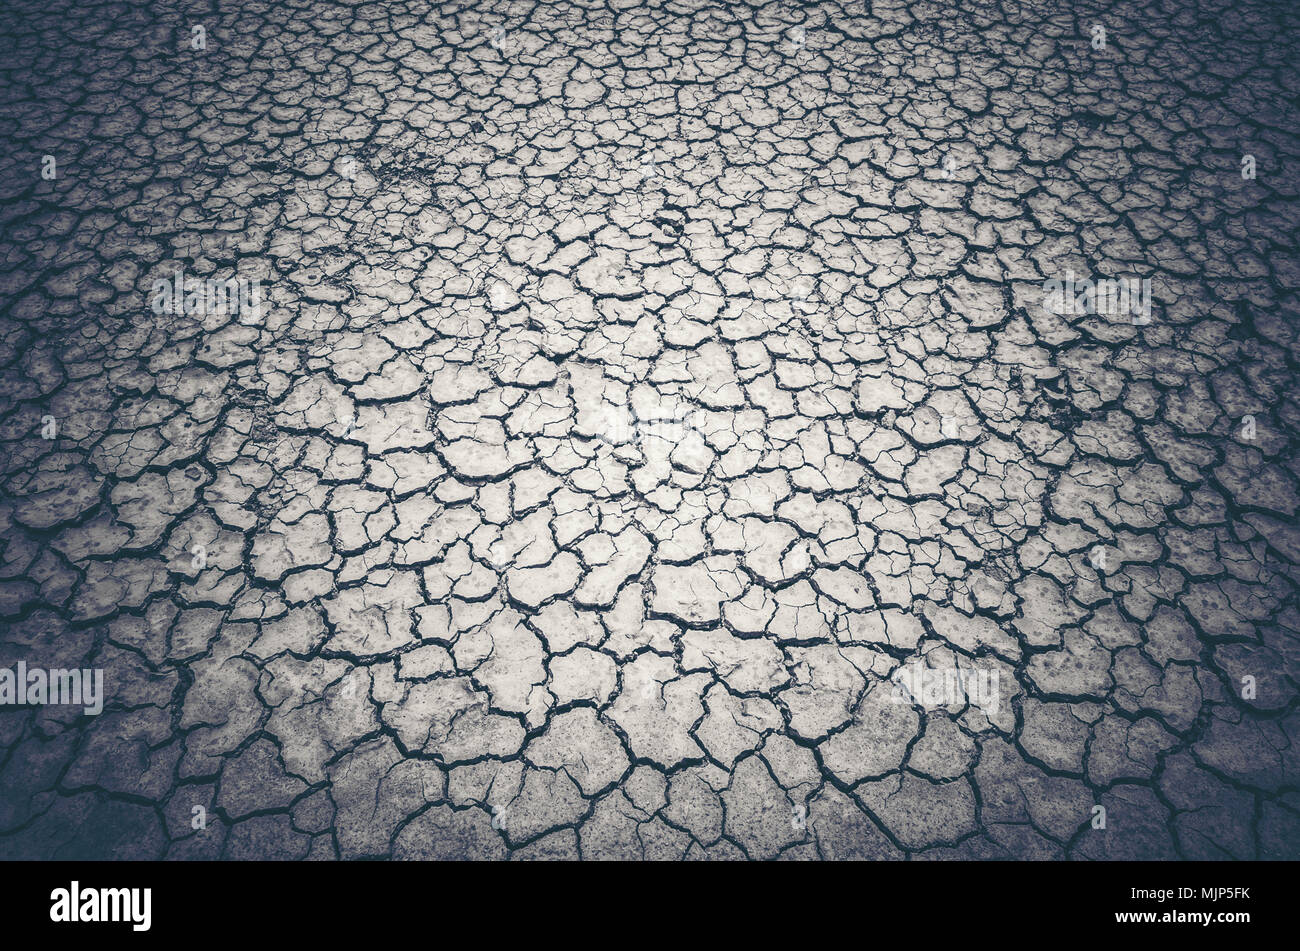 Canvas Print Dry cracked earth background, clay desert texture